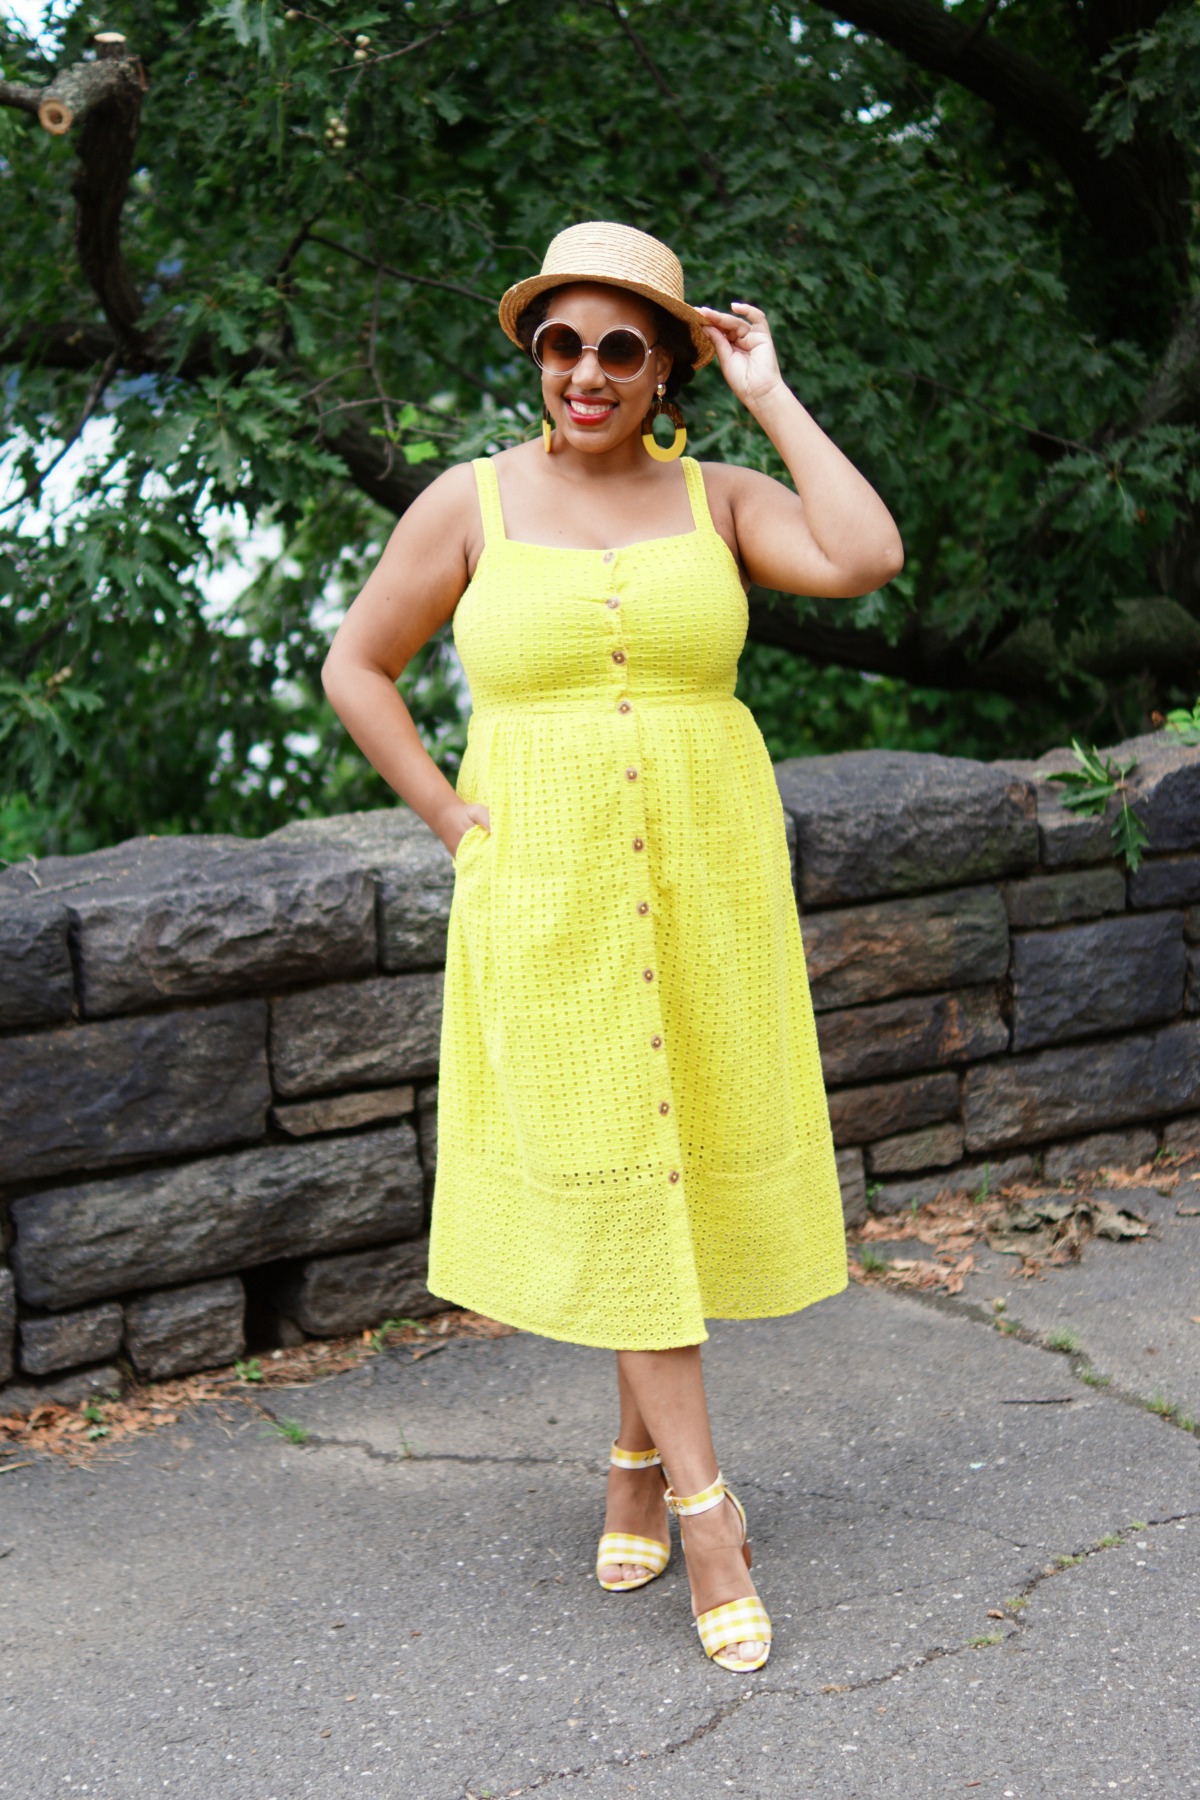 J. Crew Yellow eyelet Dress, NYC Fashion Blogger, NYC Mommy Blogger, Mom Style, Fashion for Moms